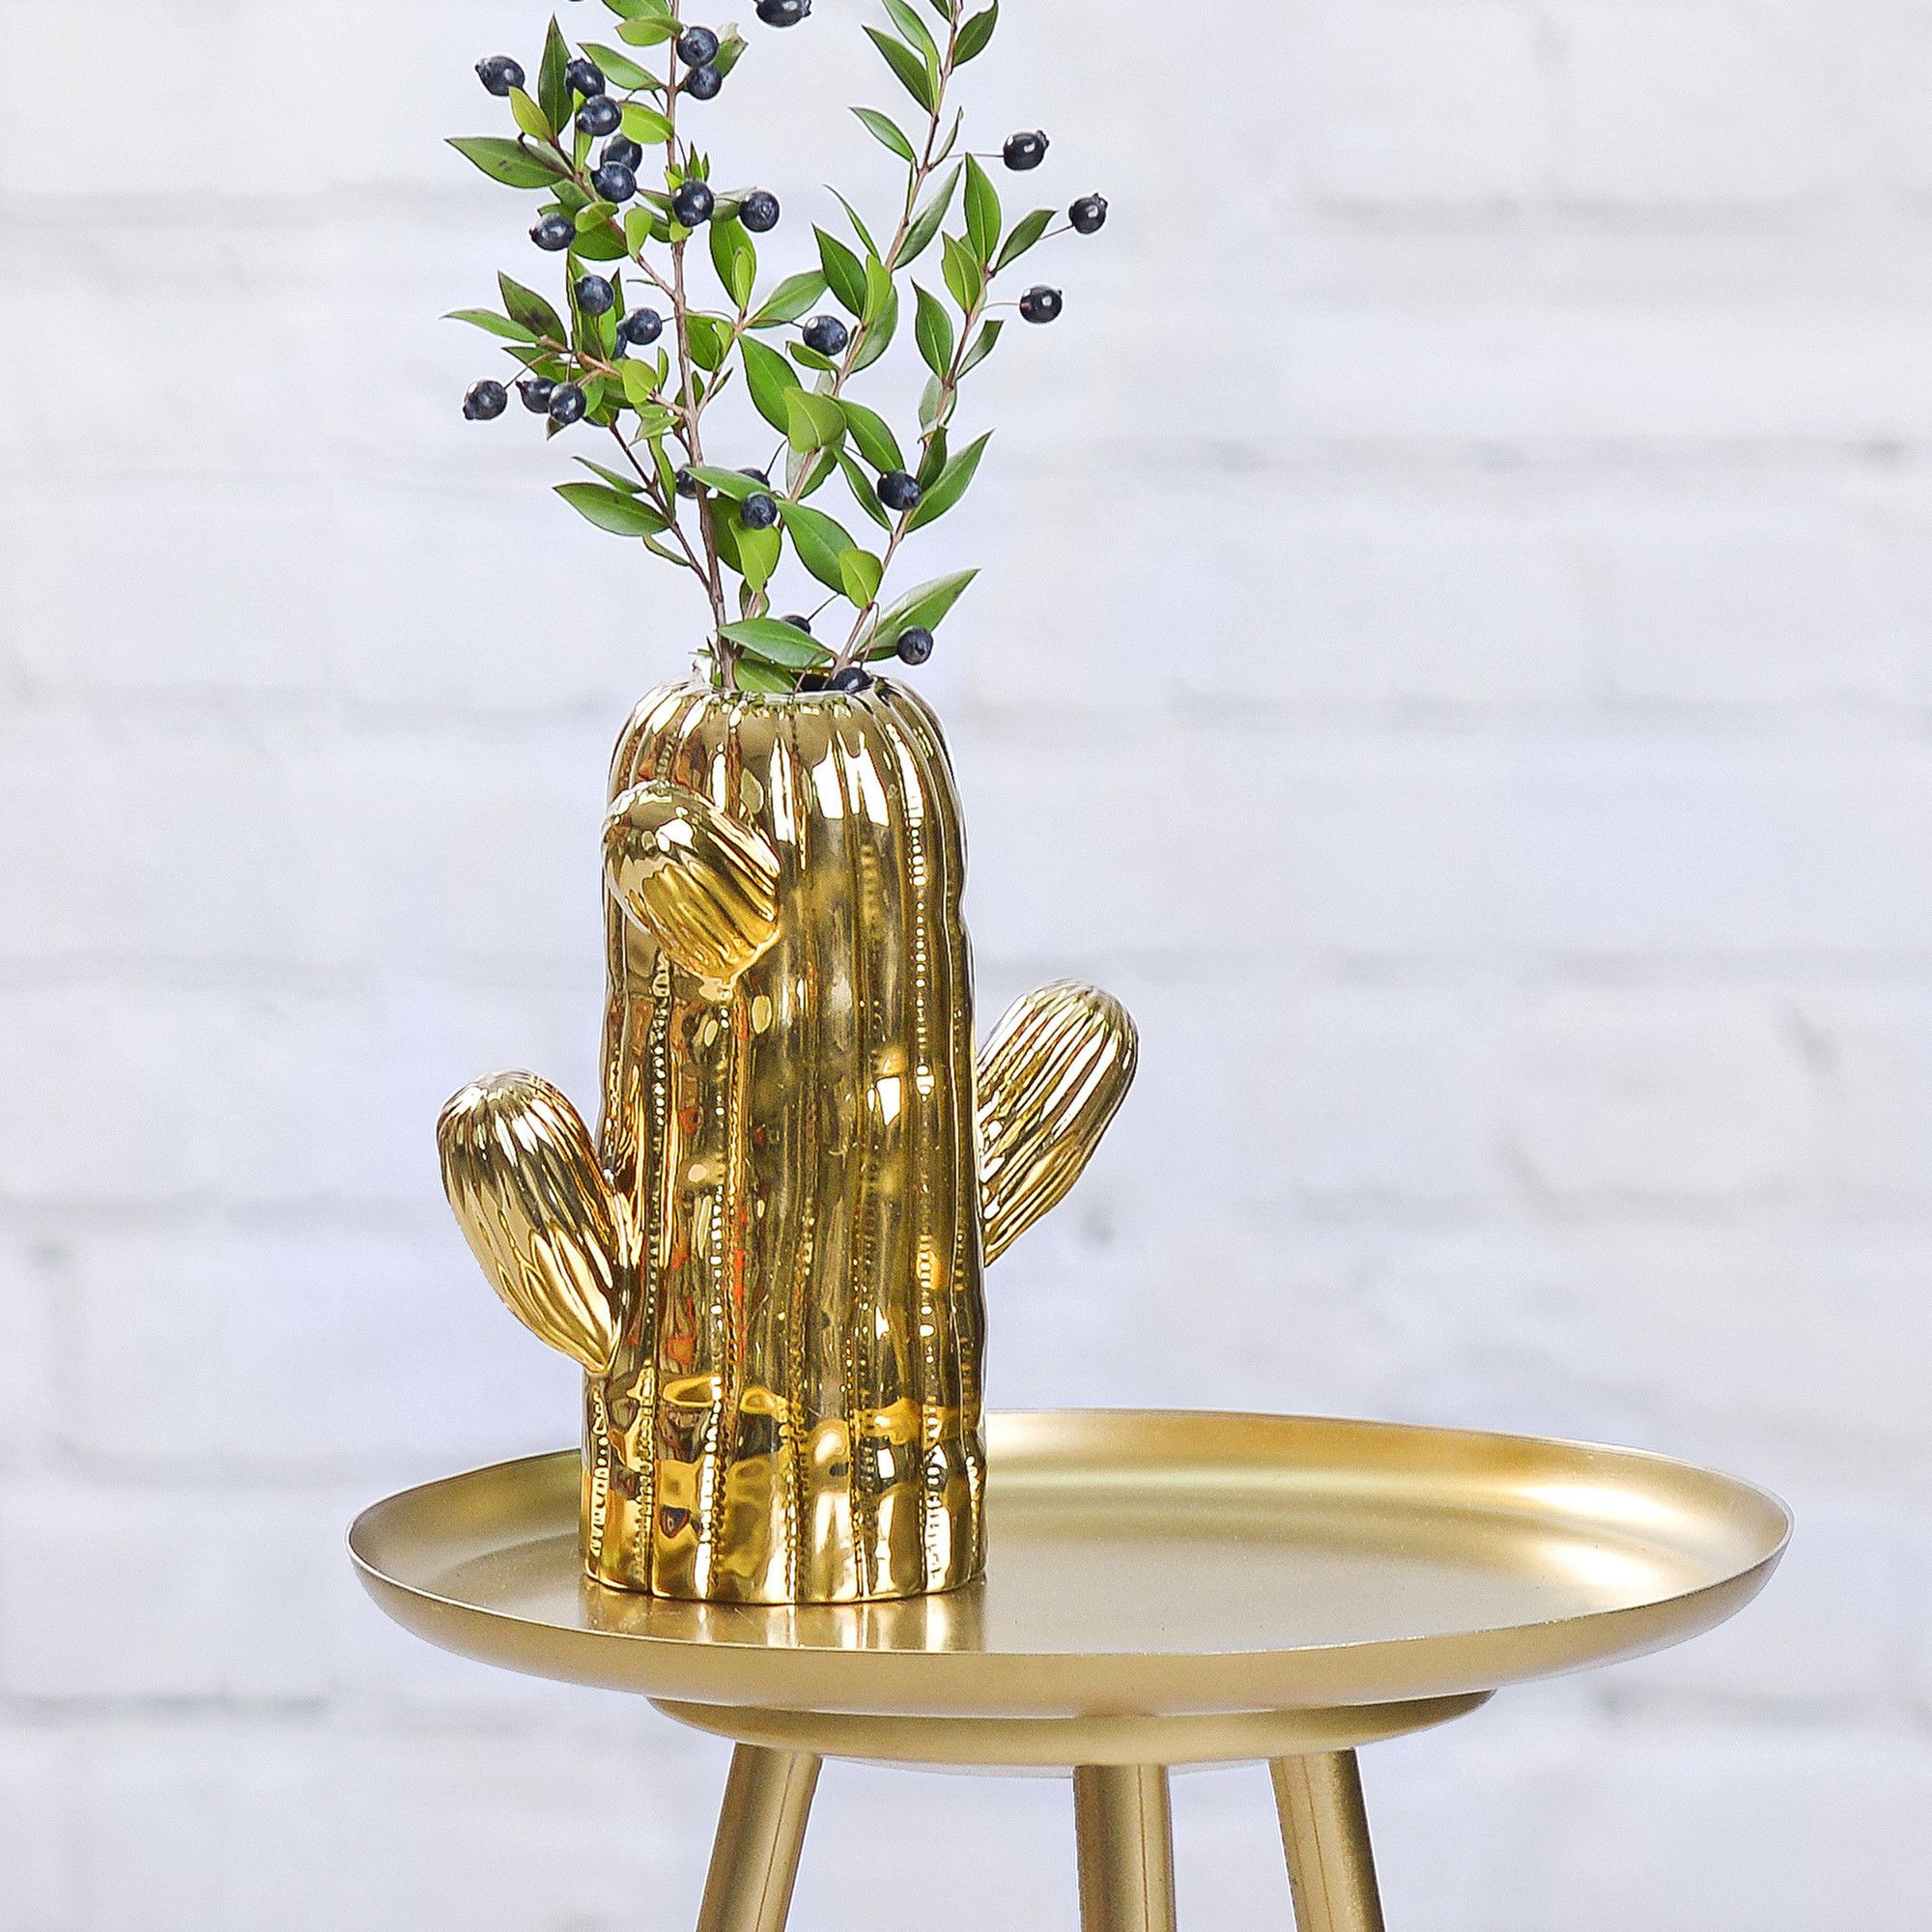 14 attractive Ceramic Cactus Vase 2024 free download ceramic cactus vase of gold cactus vase pinterest cacti buy gifts online and homewares throughout these fabulous gold ceramic cactus vases are perfect for the crazy cactus person in your lif